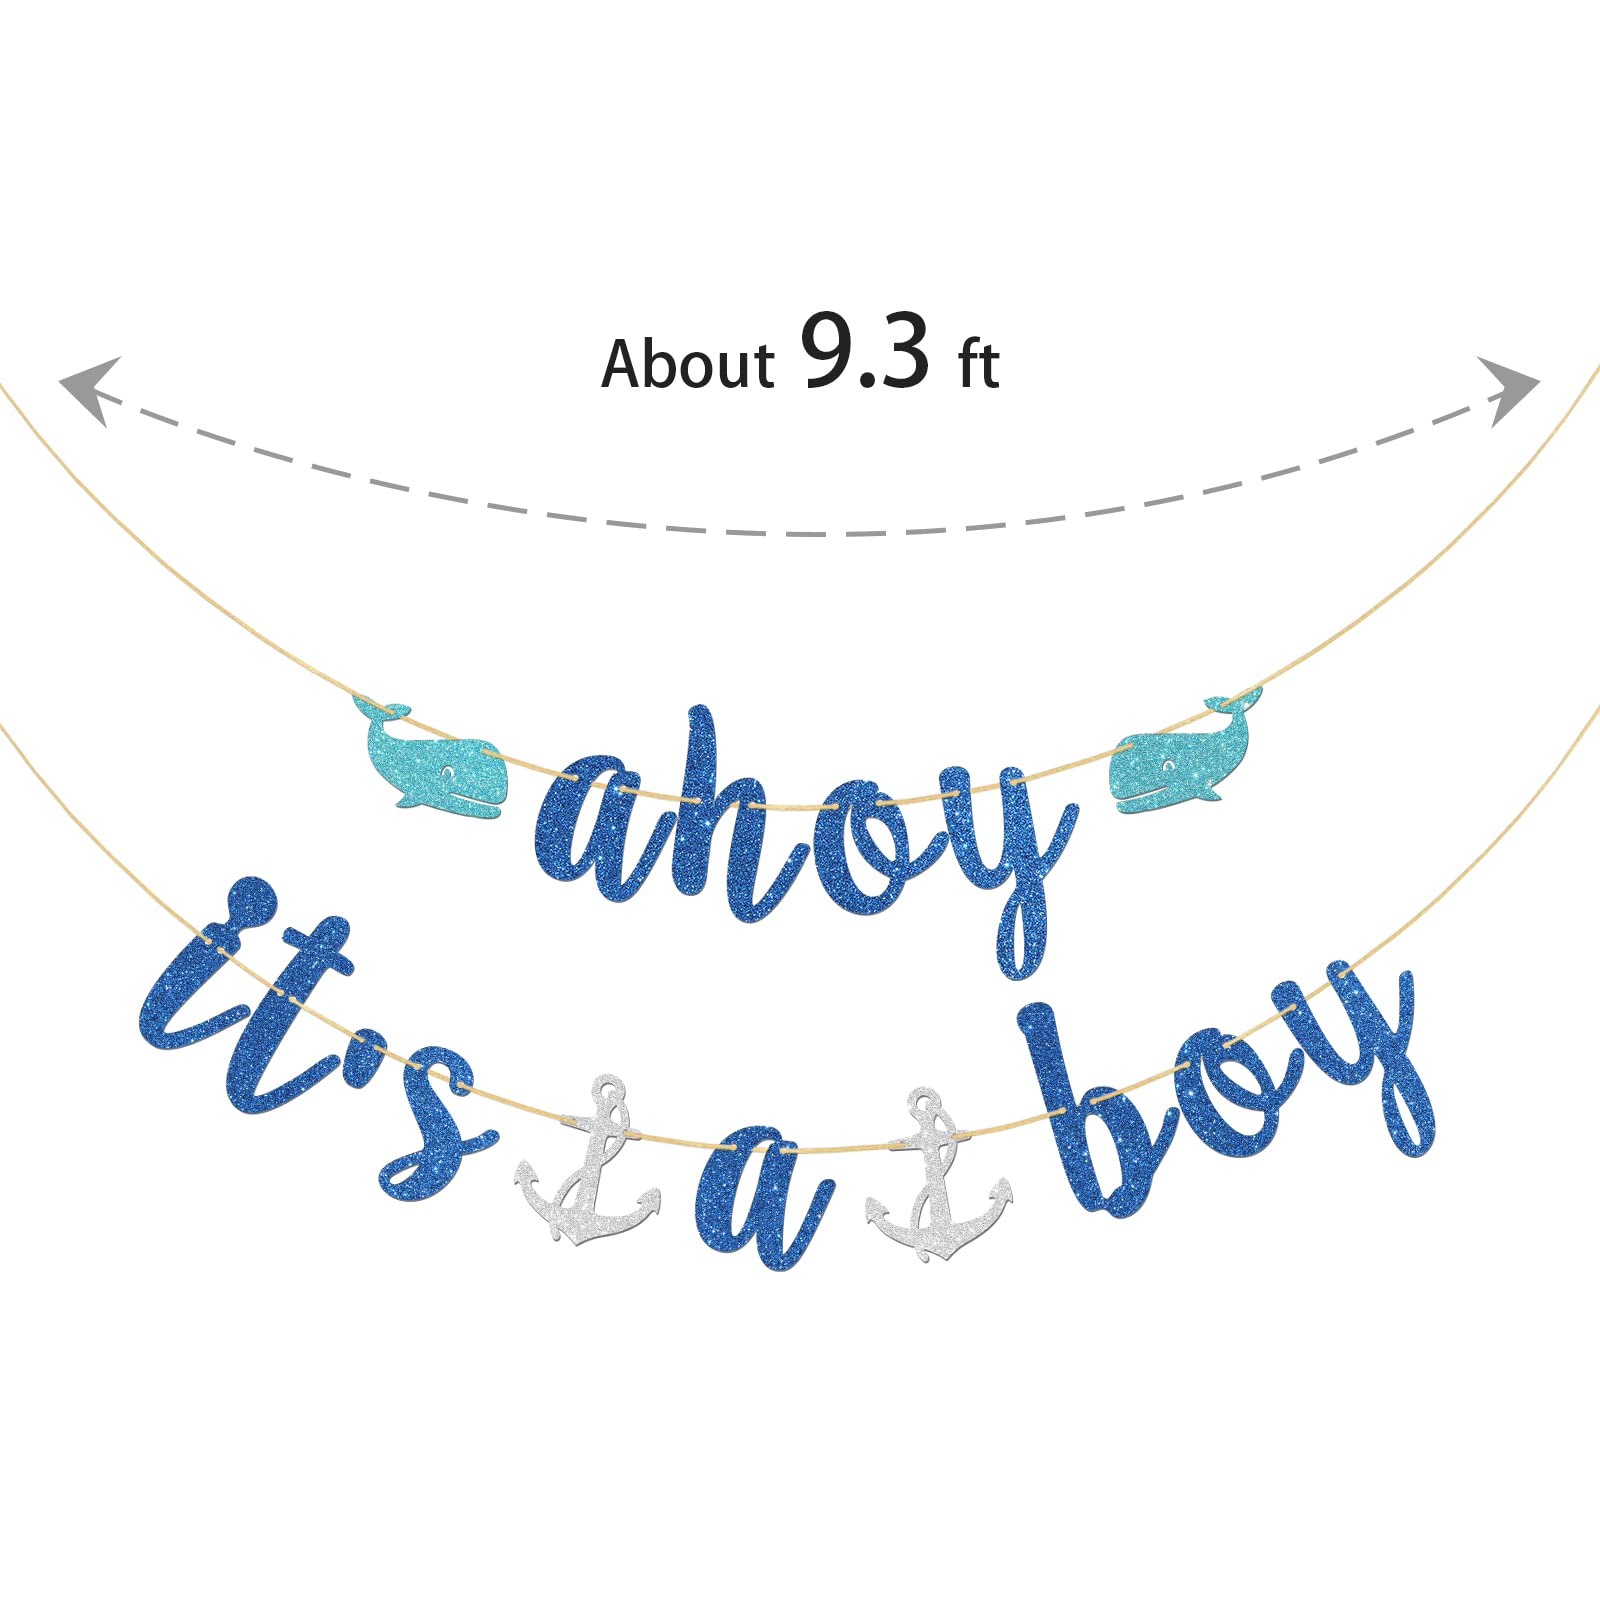 Halawawa Blue Glitter Ahoy It's a Boy Banner - Nautical Theme Baby Shower/Gender Reveal Party Decoration Banner - Welcome Baby Boy, Boy Gender Reveal, 1st Birthday Party Decors for Boys